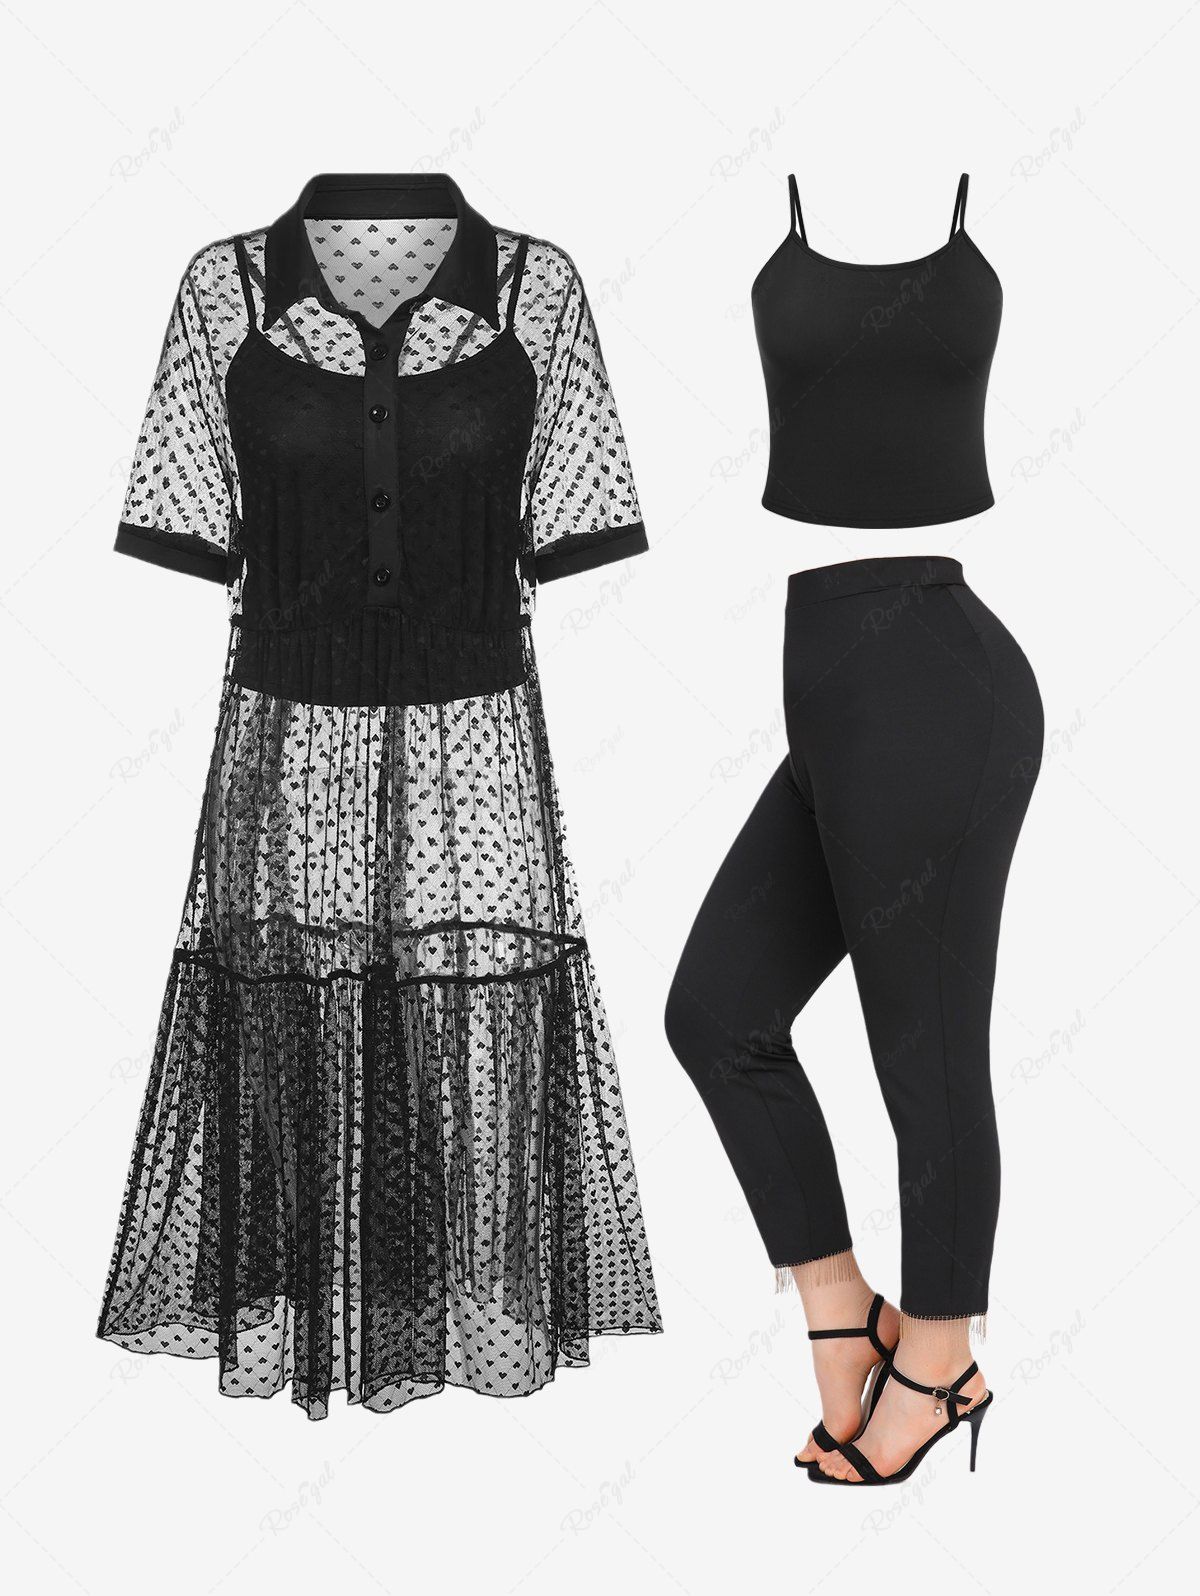 Fashion Heart Pattern Sheer Mesh Longline Blouse with Camisole Twinset and Fringed Pants Plus Size Fall Outfit  